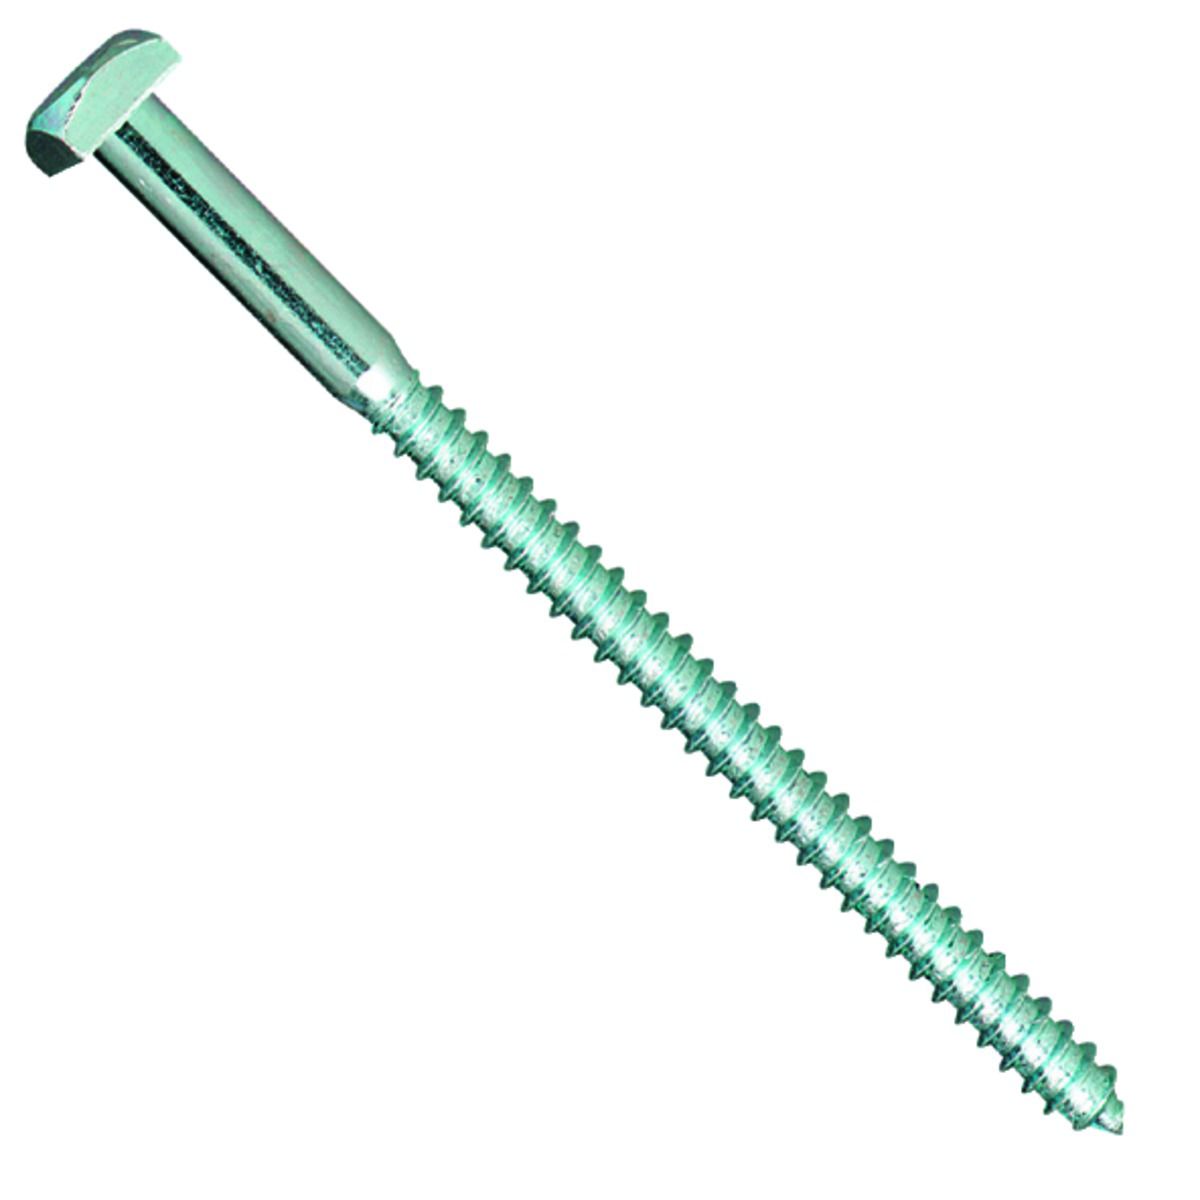 Image of Wickes Coach Screws - M8 x 130mm Pack of 6